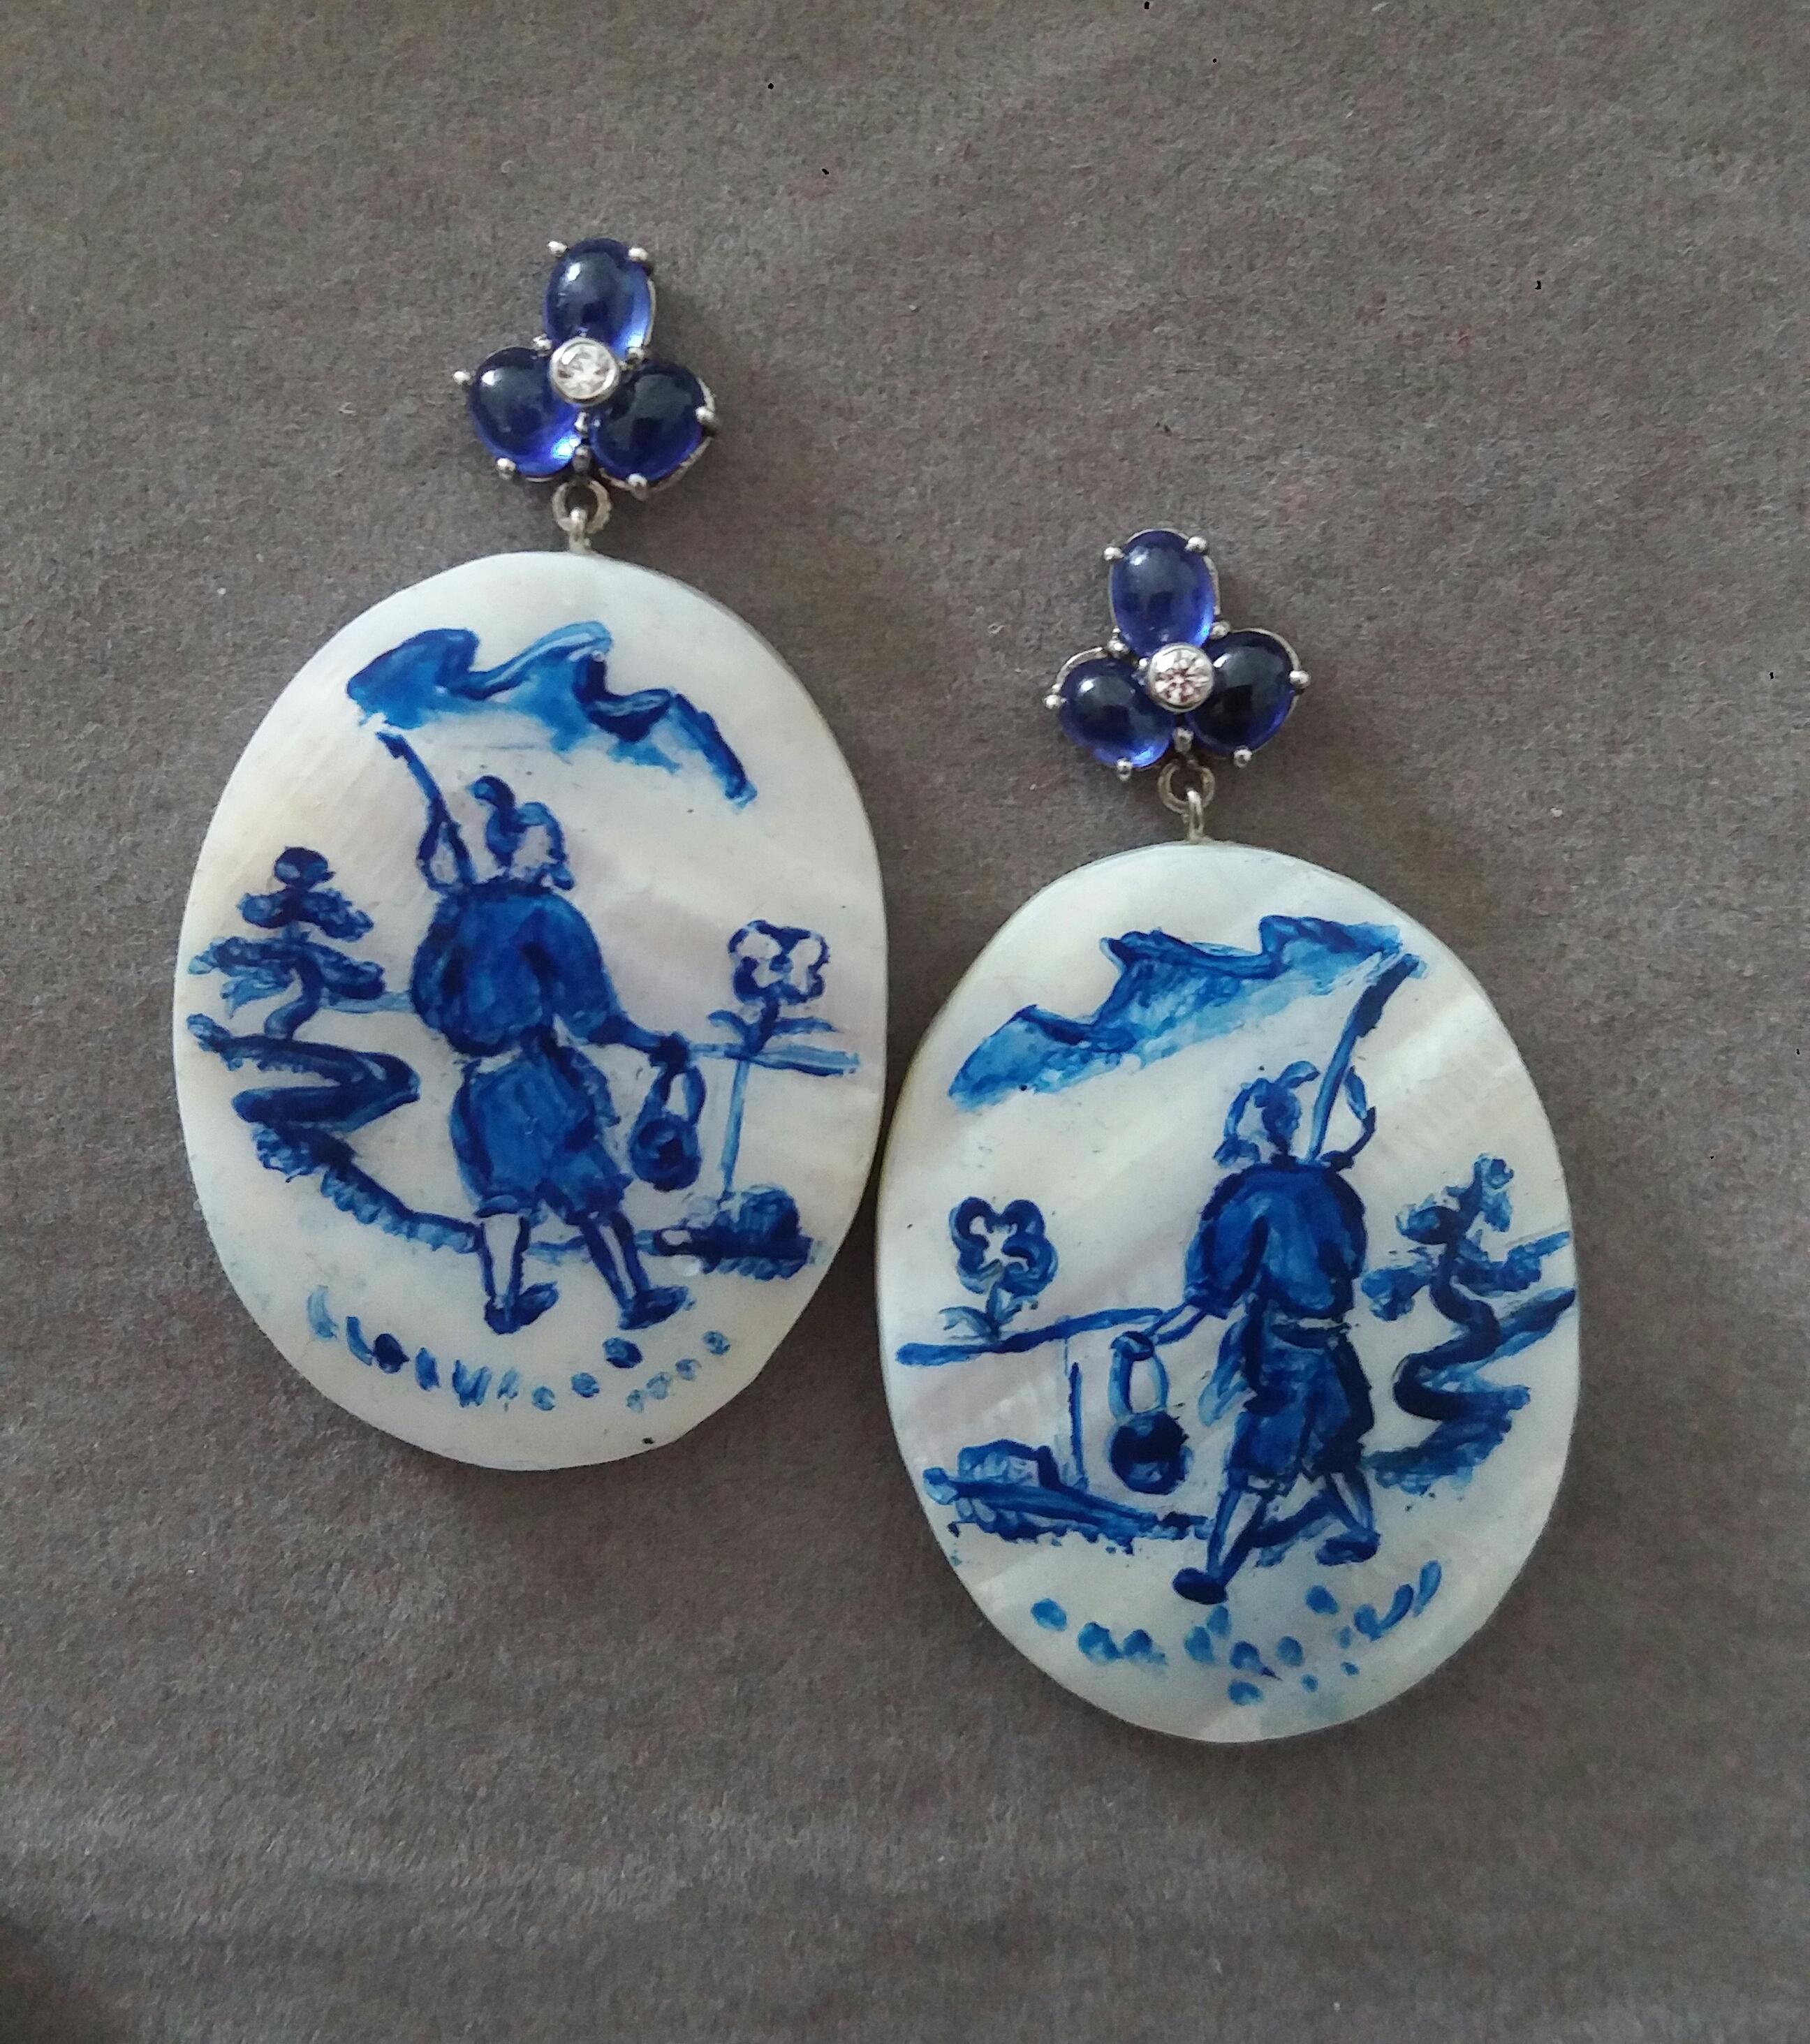 Vintage pair of oval shape hand painted Mother of Pearl 28 mm x 40 mm, depicting a chinese fisherman walking near the river ,suspended from 3 Blue Sapphire cabs each measuring 4x5 mm with a small full cut diamond in the center.

In 1978 our workshop